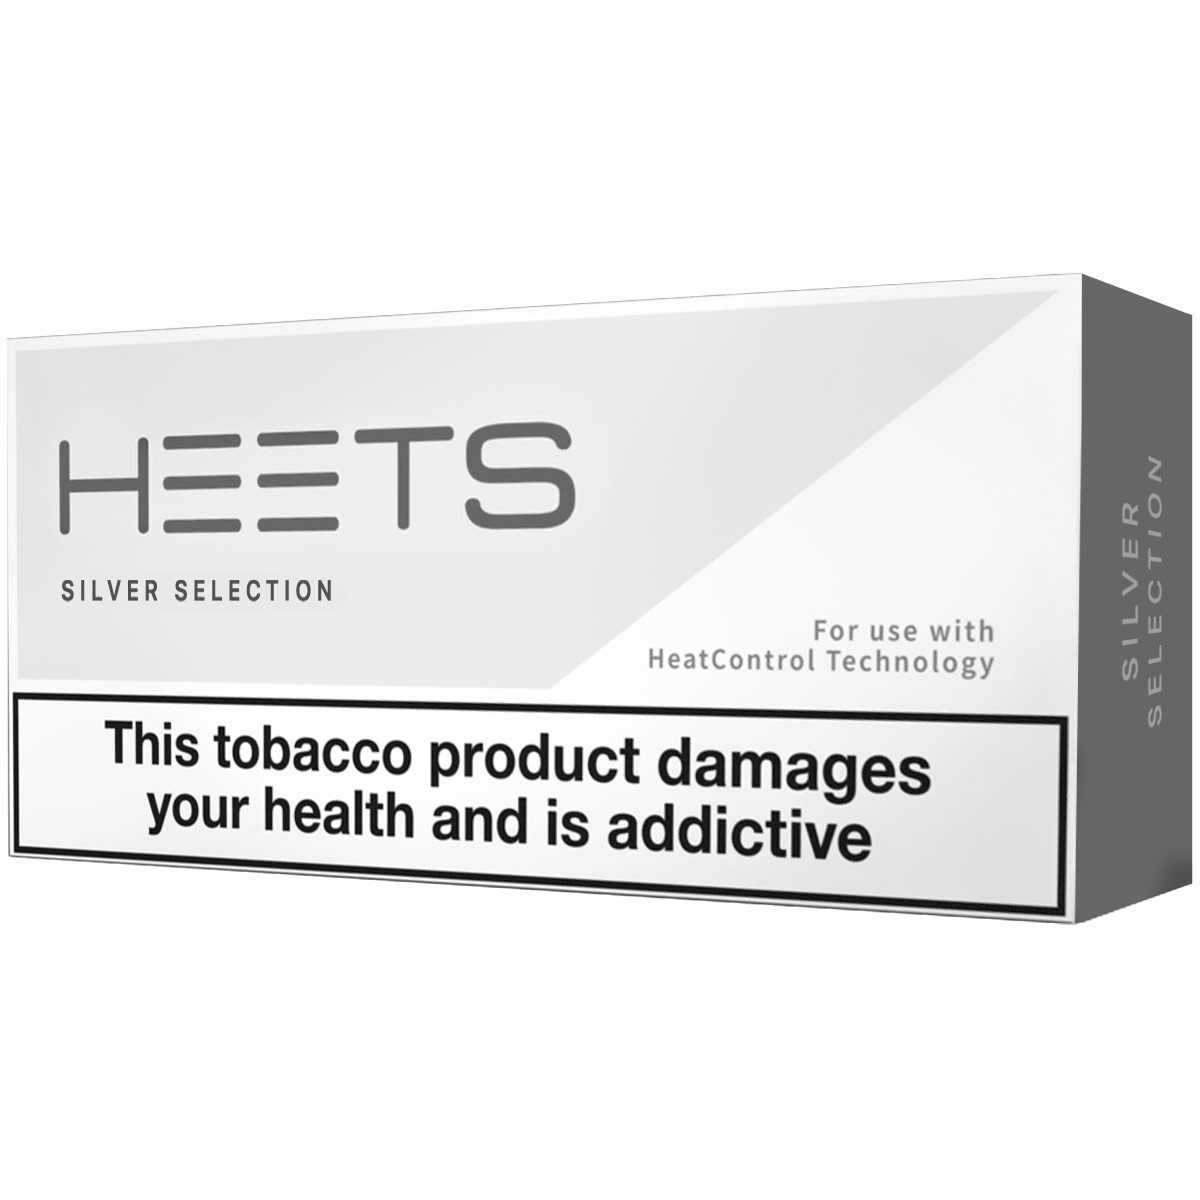 Heets - Silver Selection